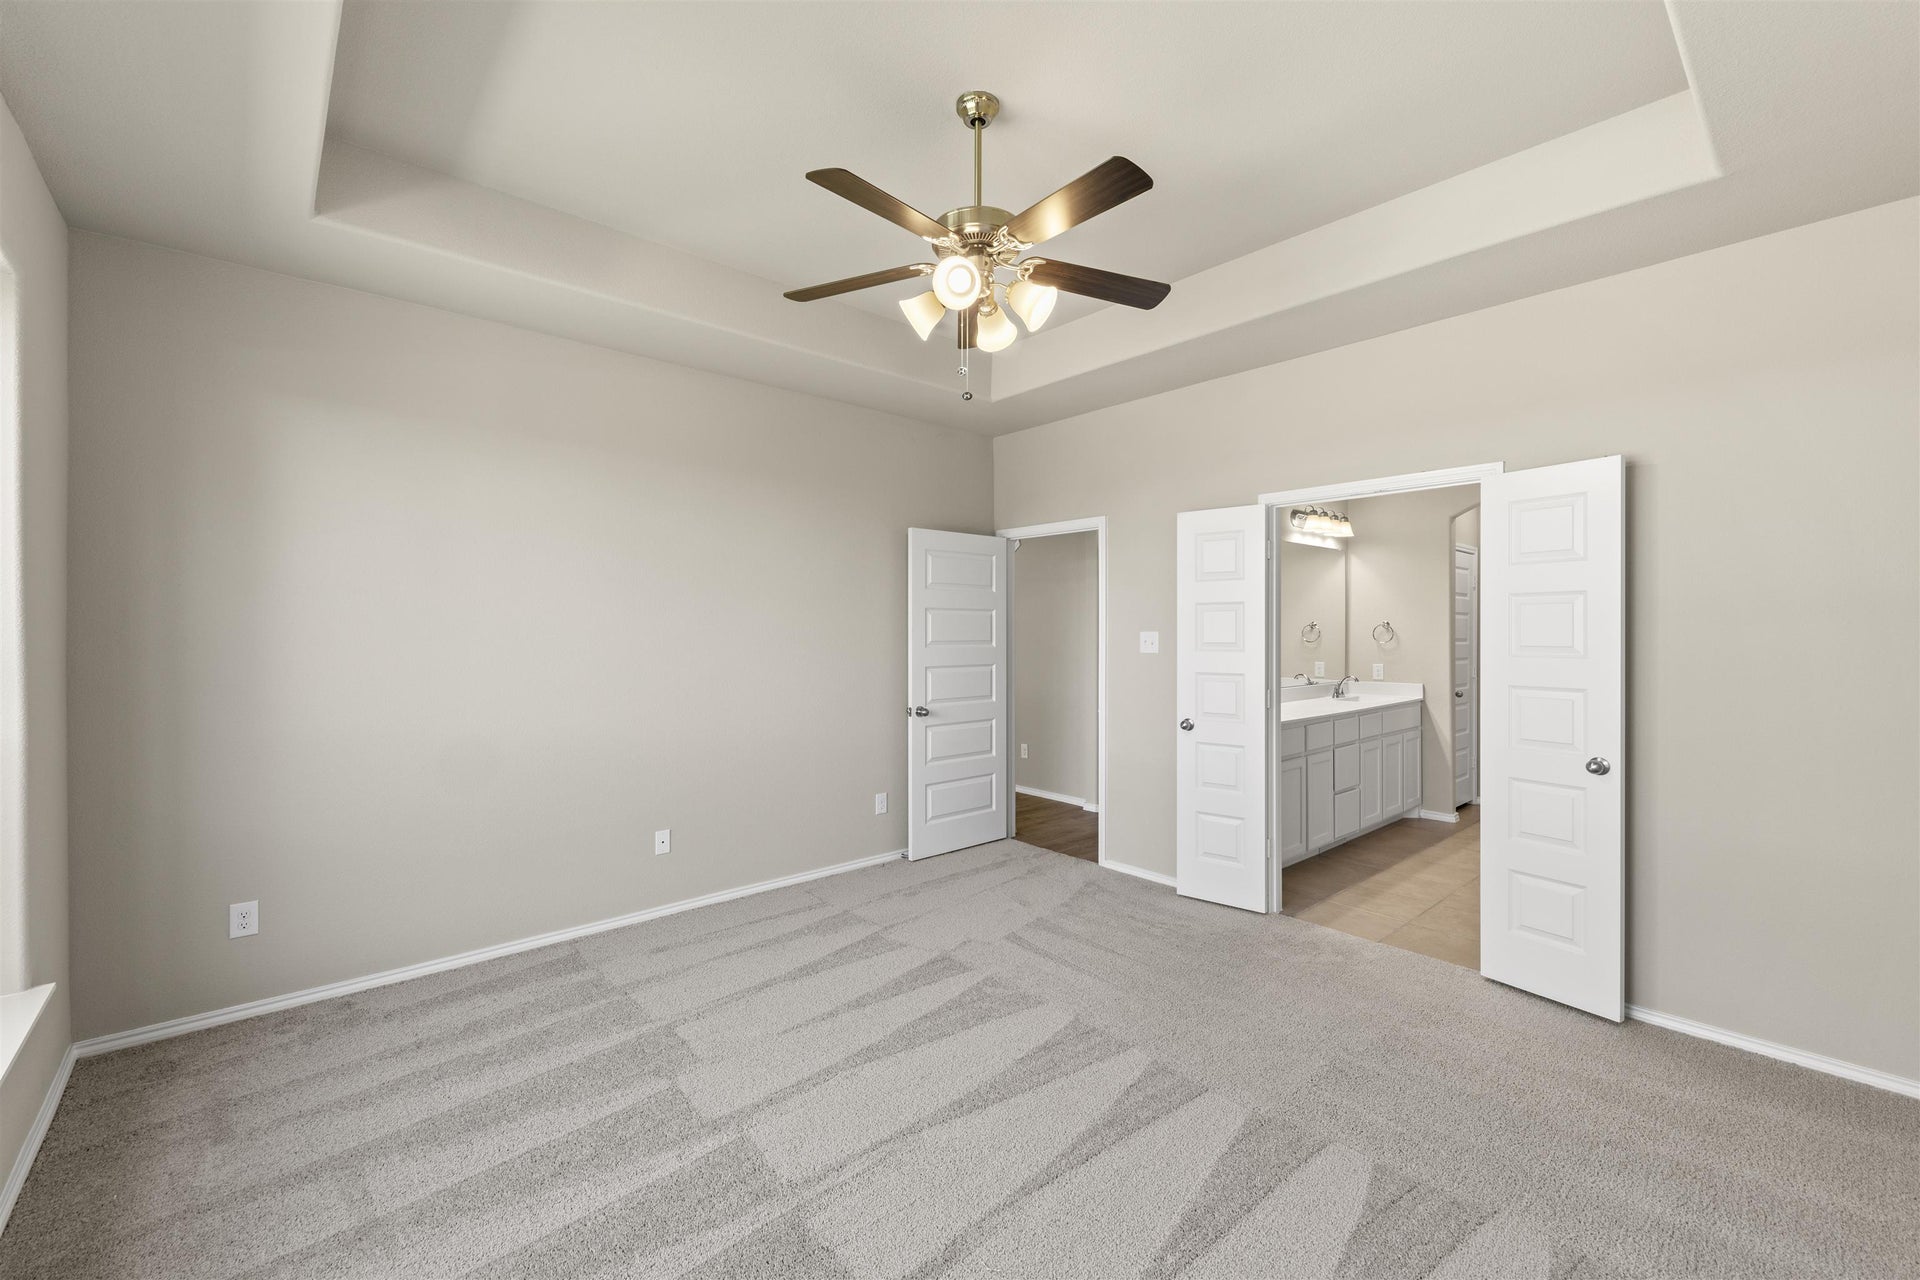 4br New Home in Fort Worth, TX